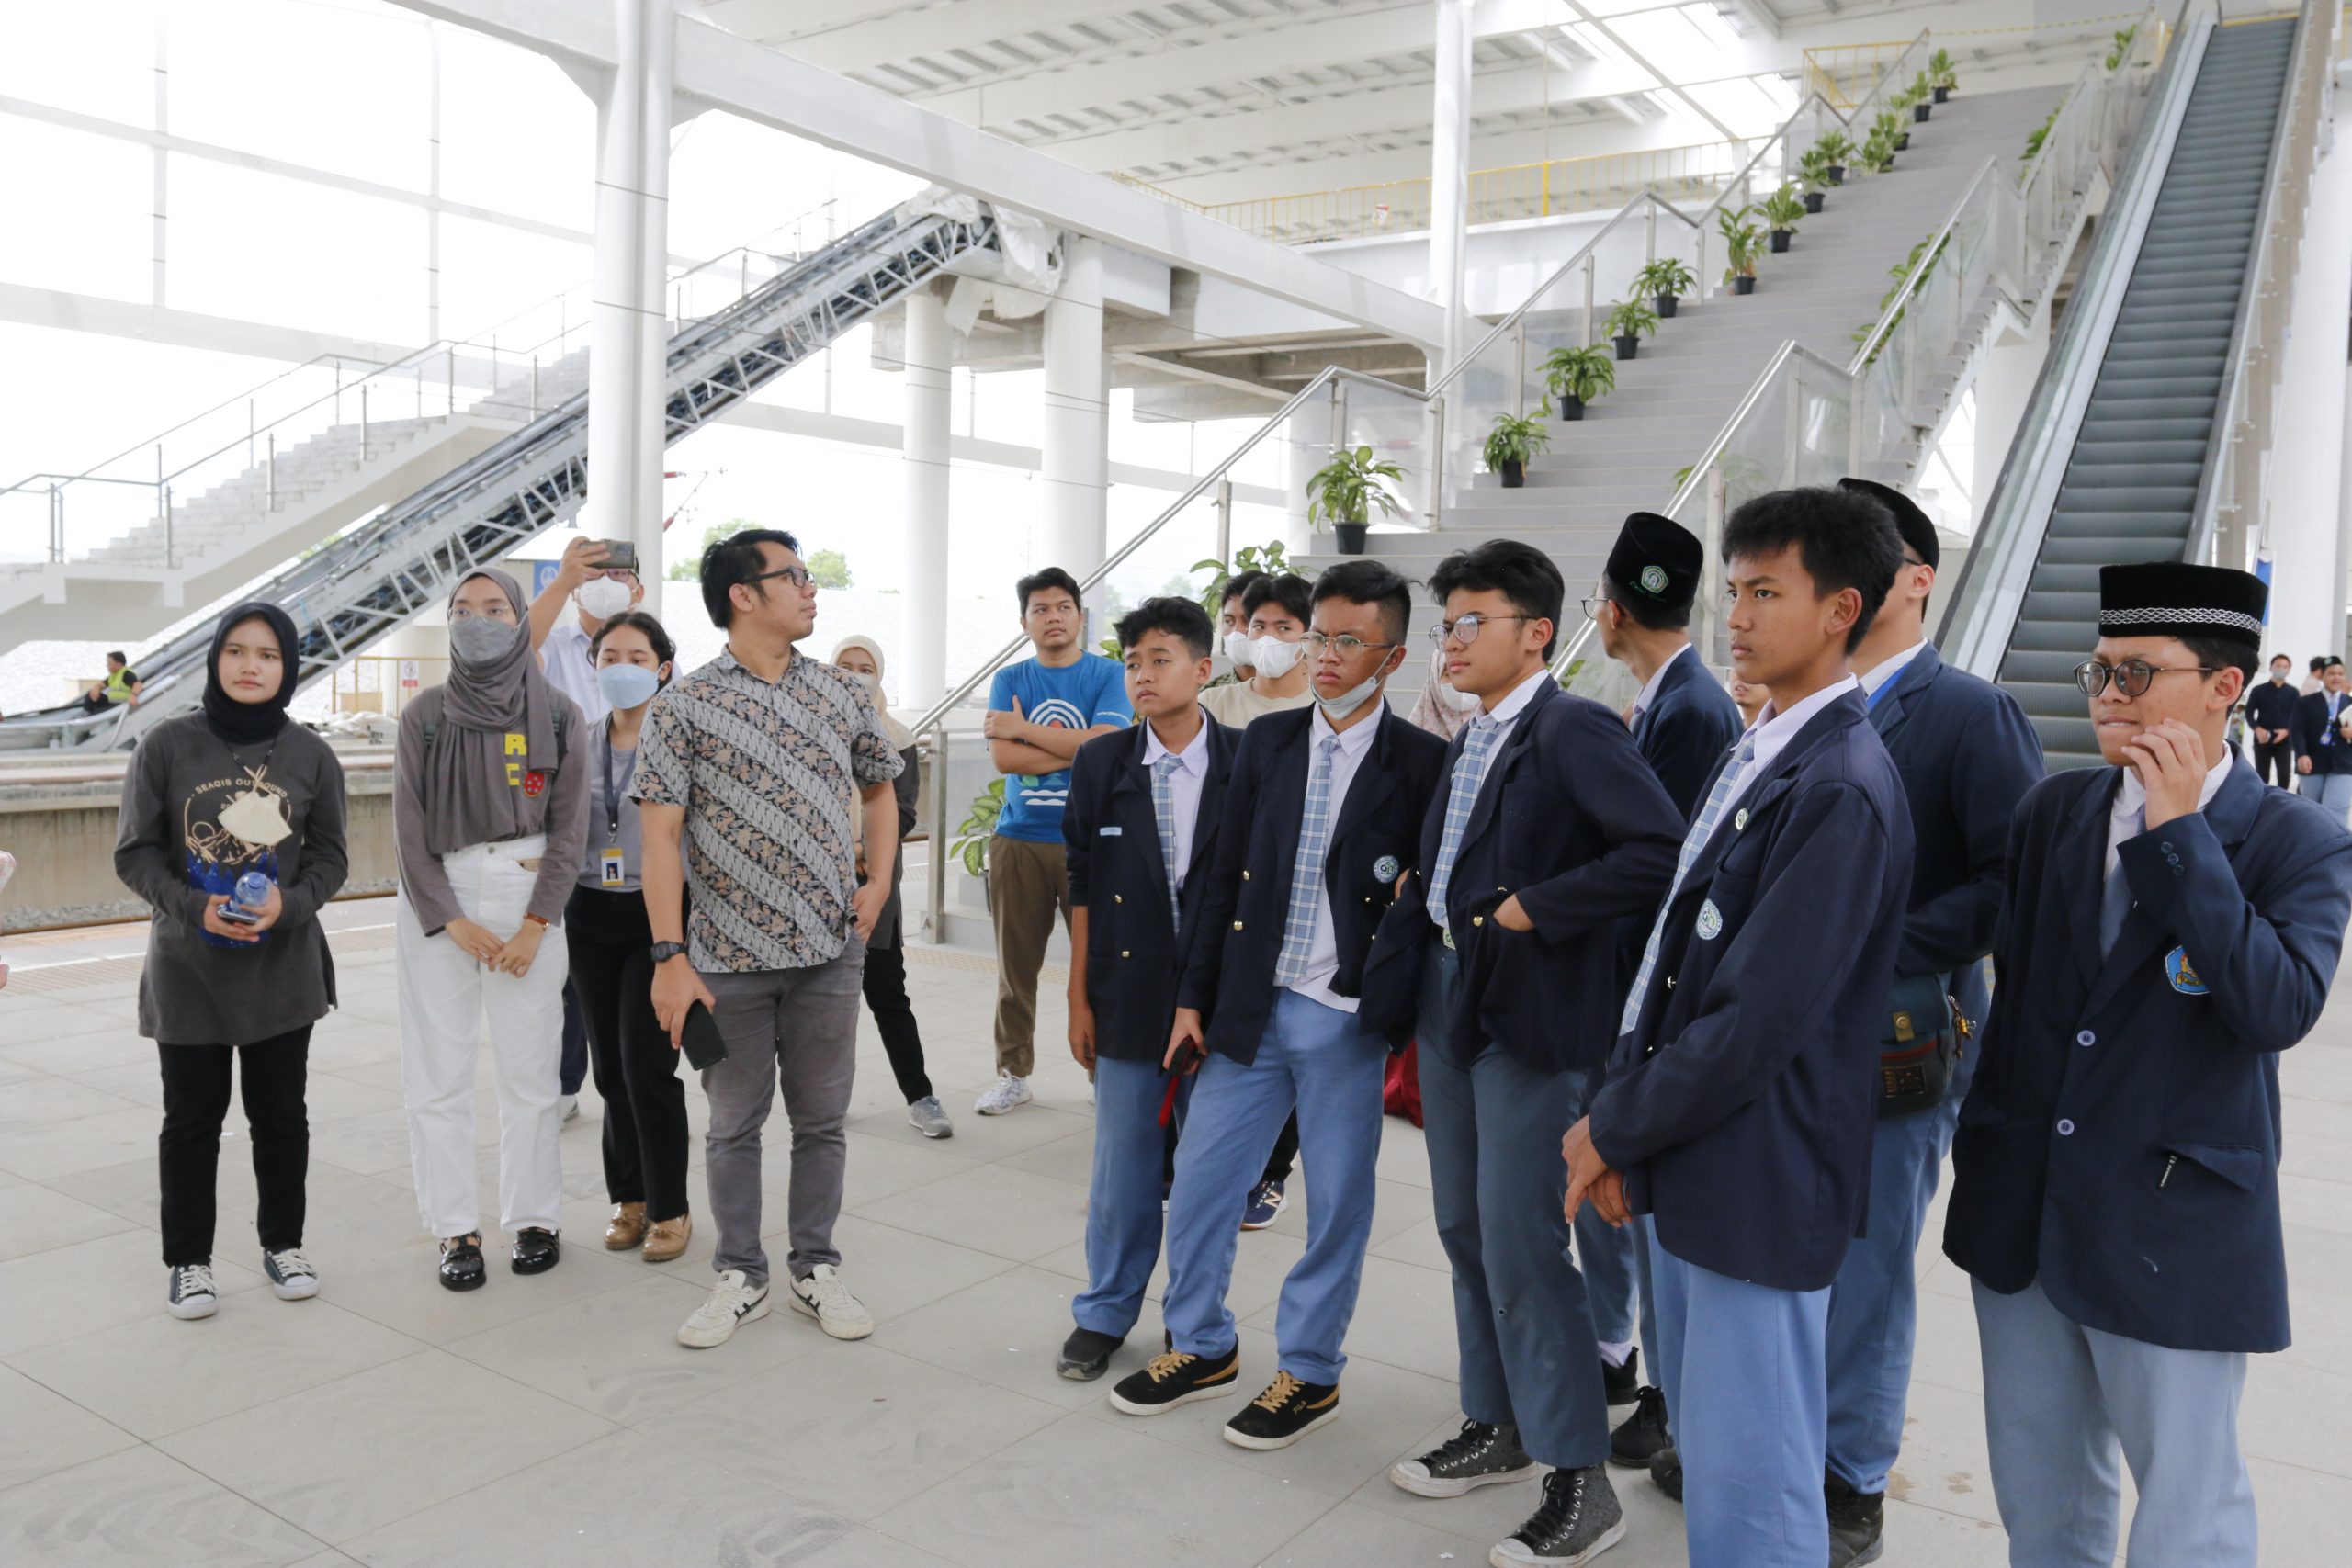 SEAQIS Team and High Schoolers Study Visit to Jakarta-Bandung High-Speed Railway